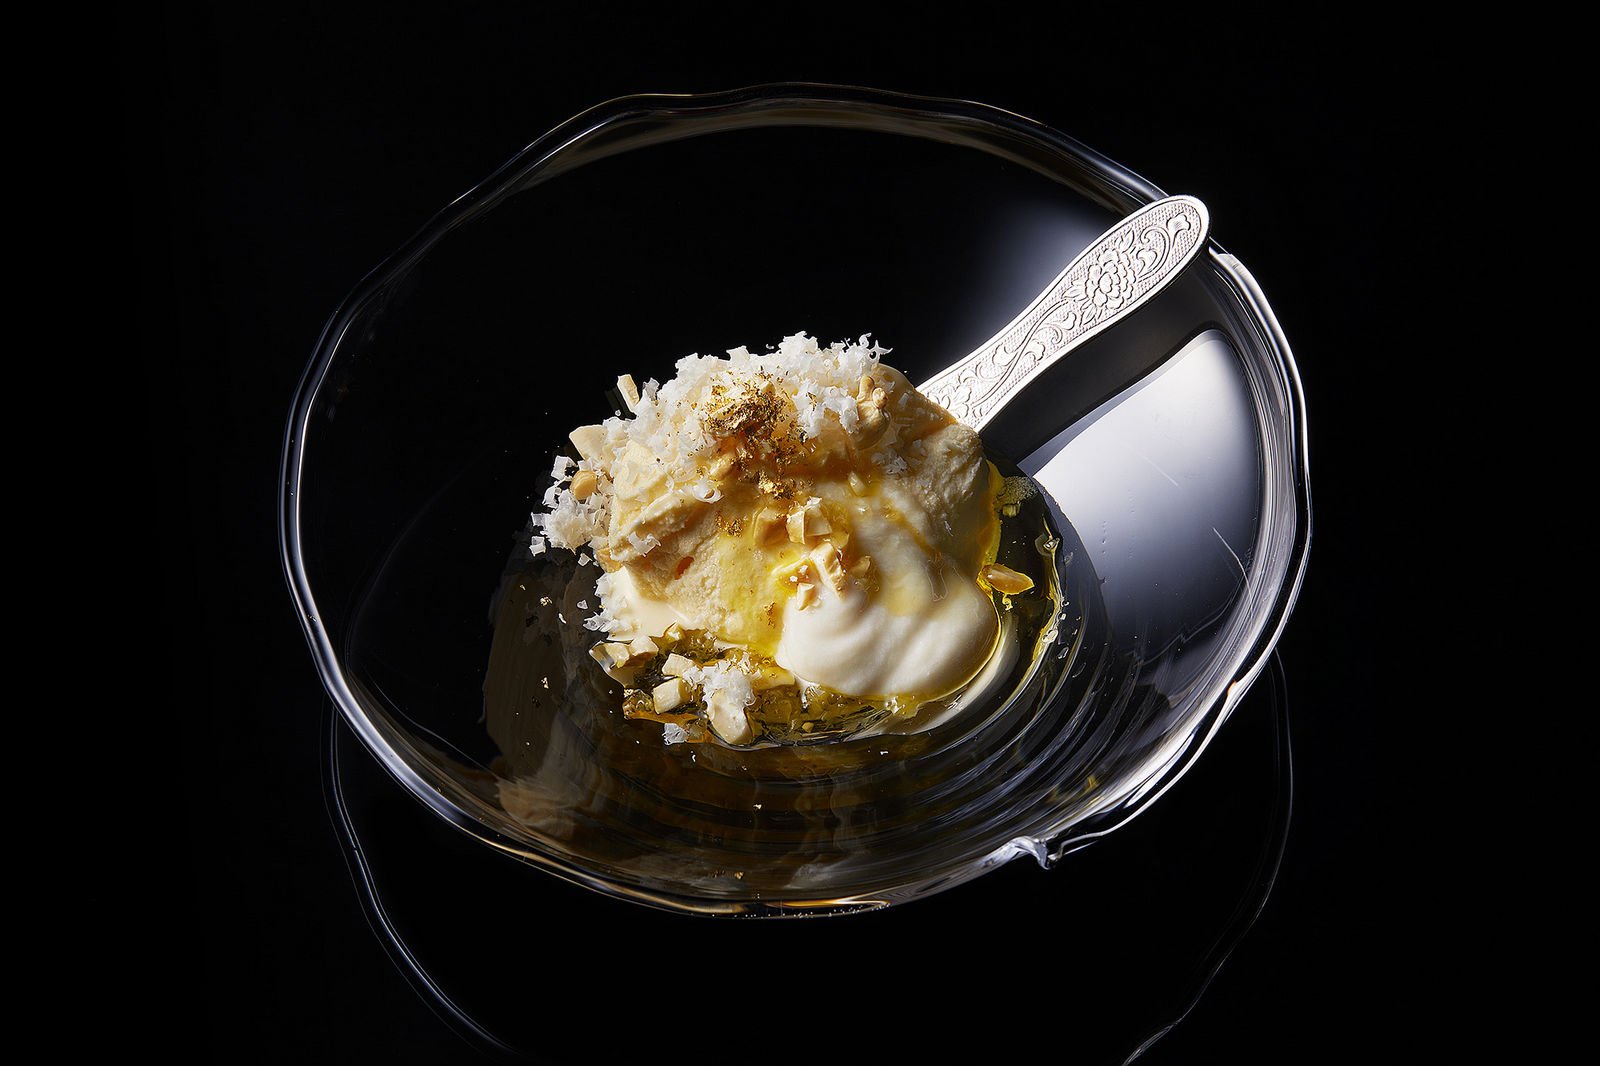 At $6,700 per scoop, Japan's white truffle ice cream is officially the most expensive in the world - Luxurylaunches